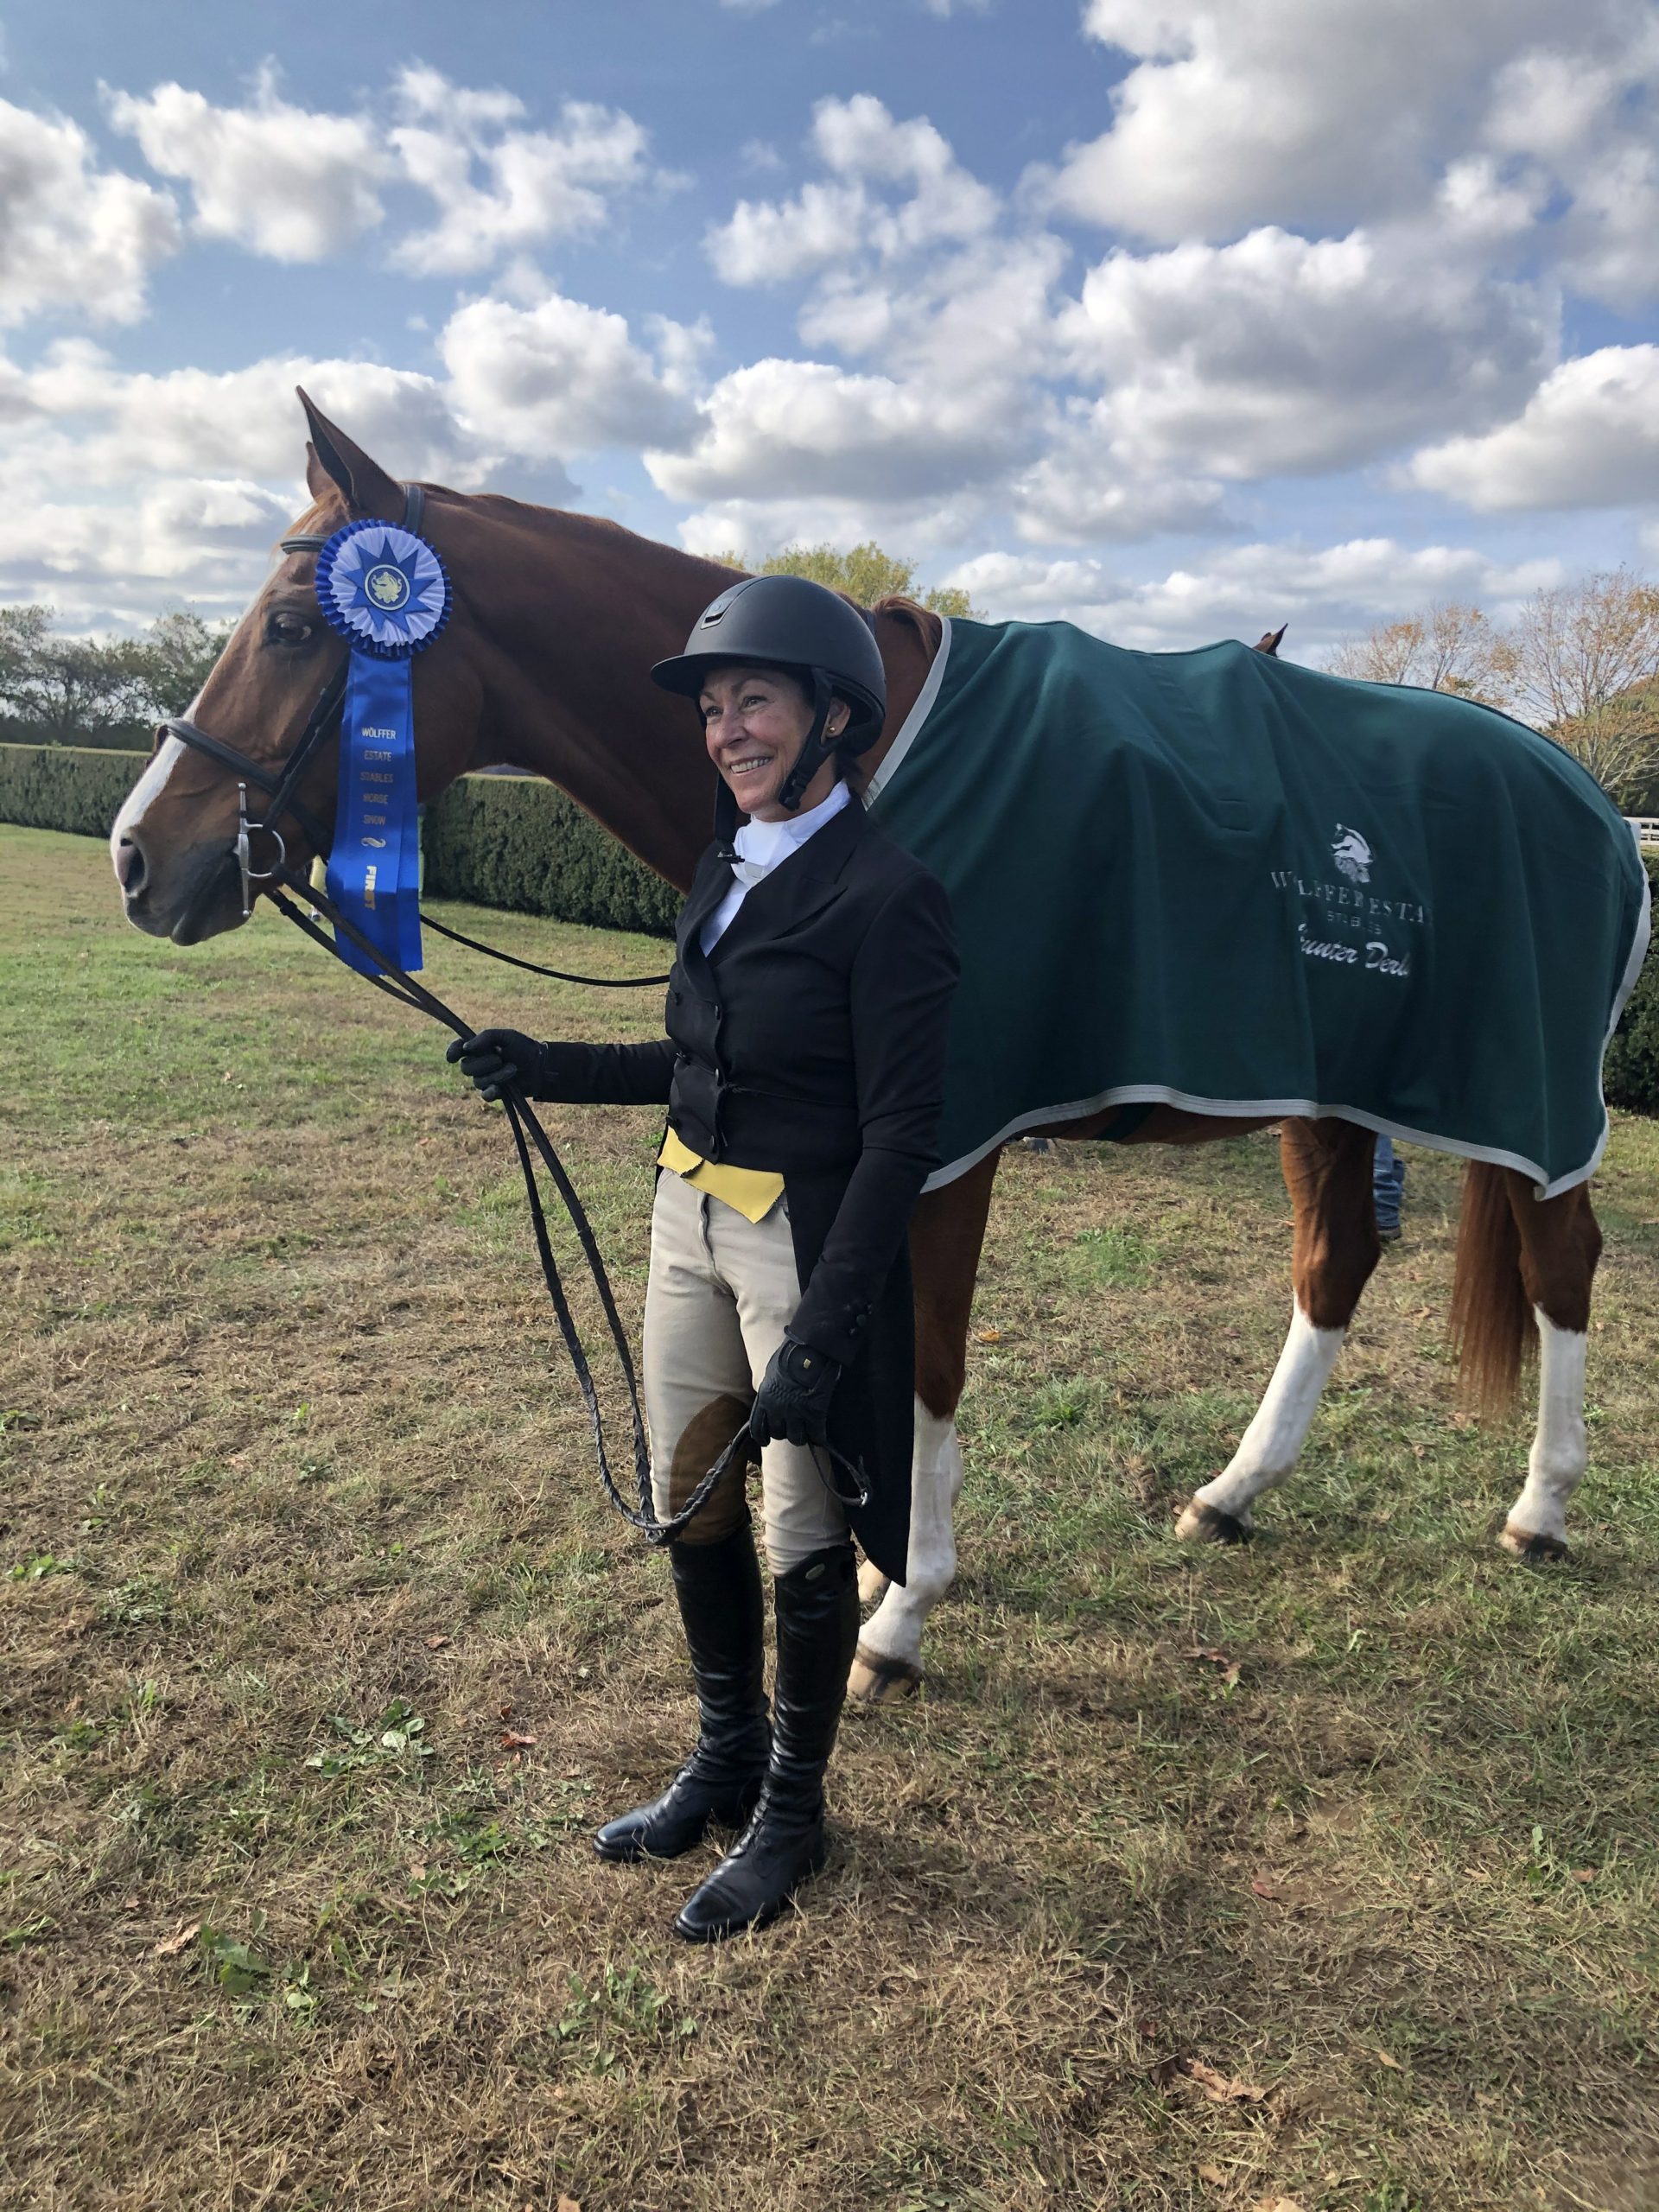 Deborah Thayer and her horse, Asterisk Z, won the 2’6-2’9 division at the Wolffer Hunter Derby on the Grand Prix field at Wolffer Estate Stables on Sunday. Thayer trains with Harriet deLeyer at Topping Riding Club.